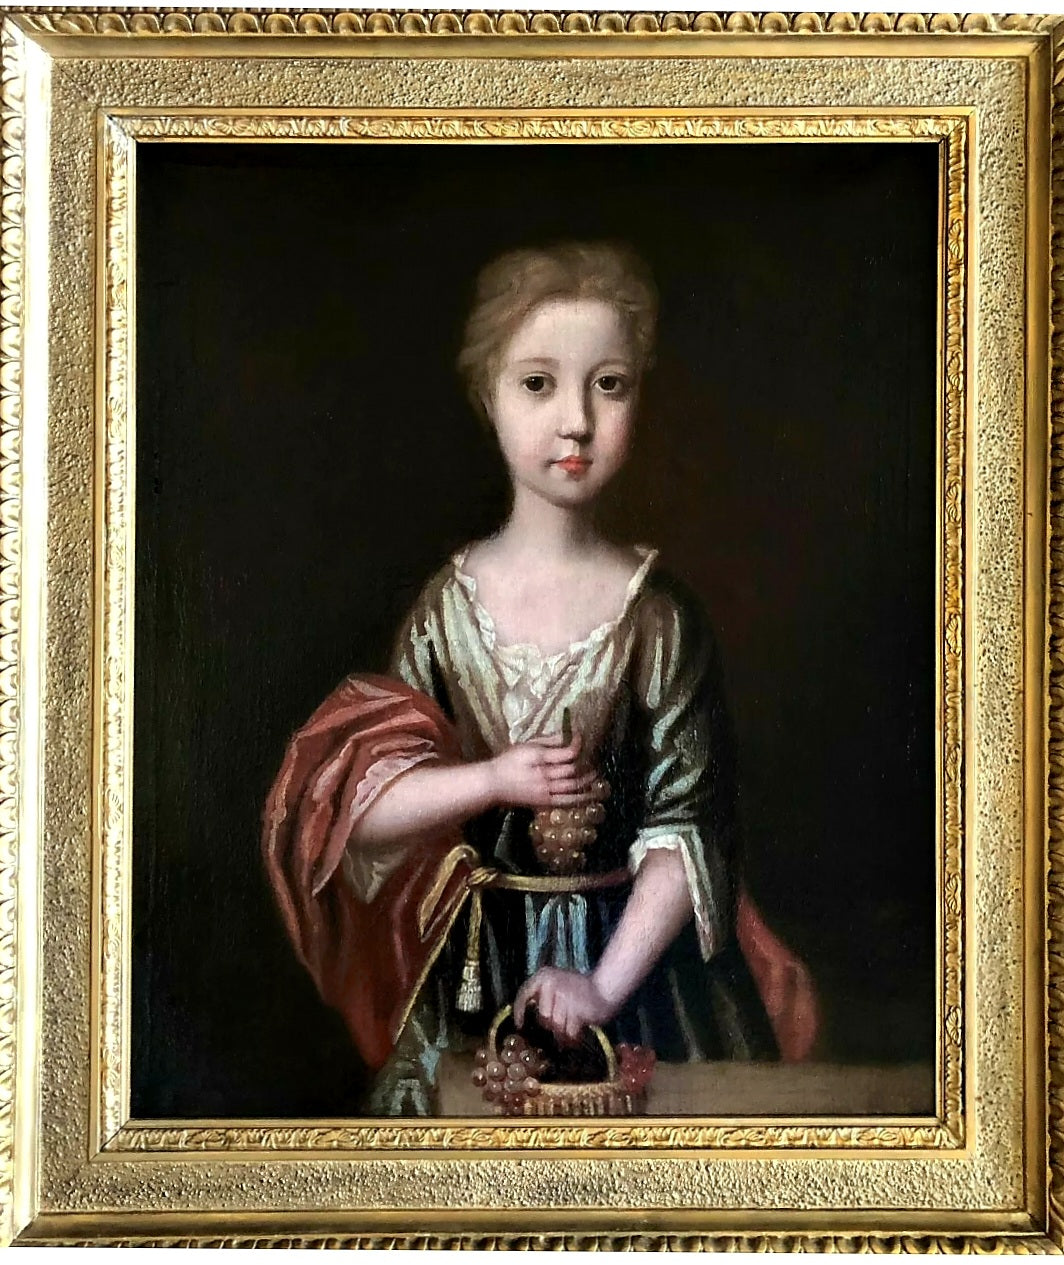 Slightly Naïve, 18th Century English School Antique Oil on Canvas Portrait of a Young Aristocratic Girl With Provenance